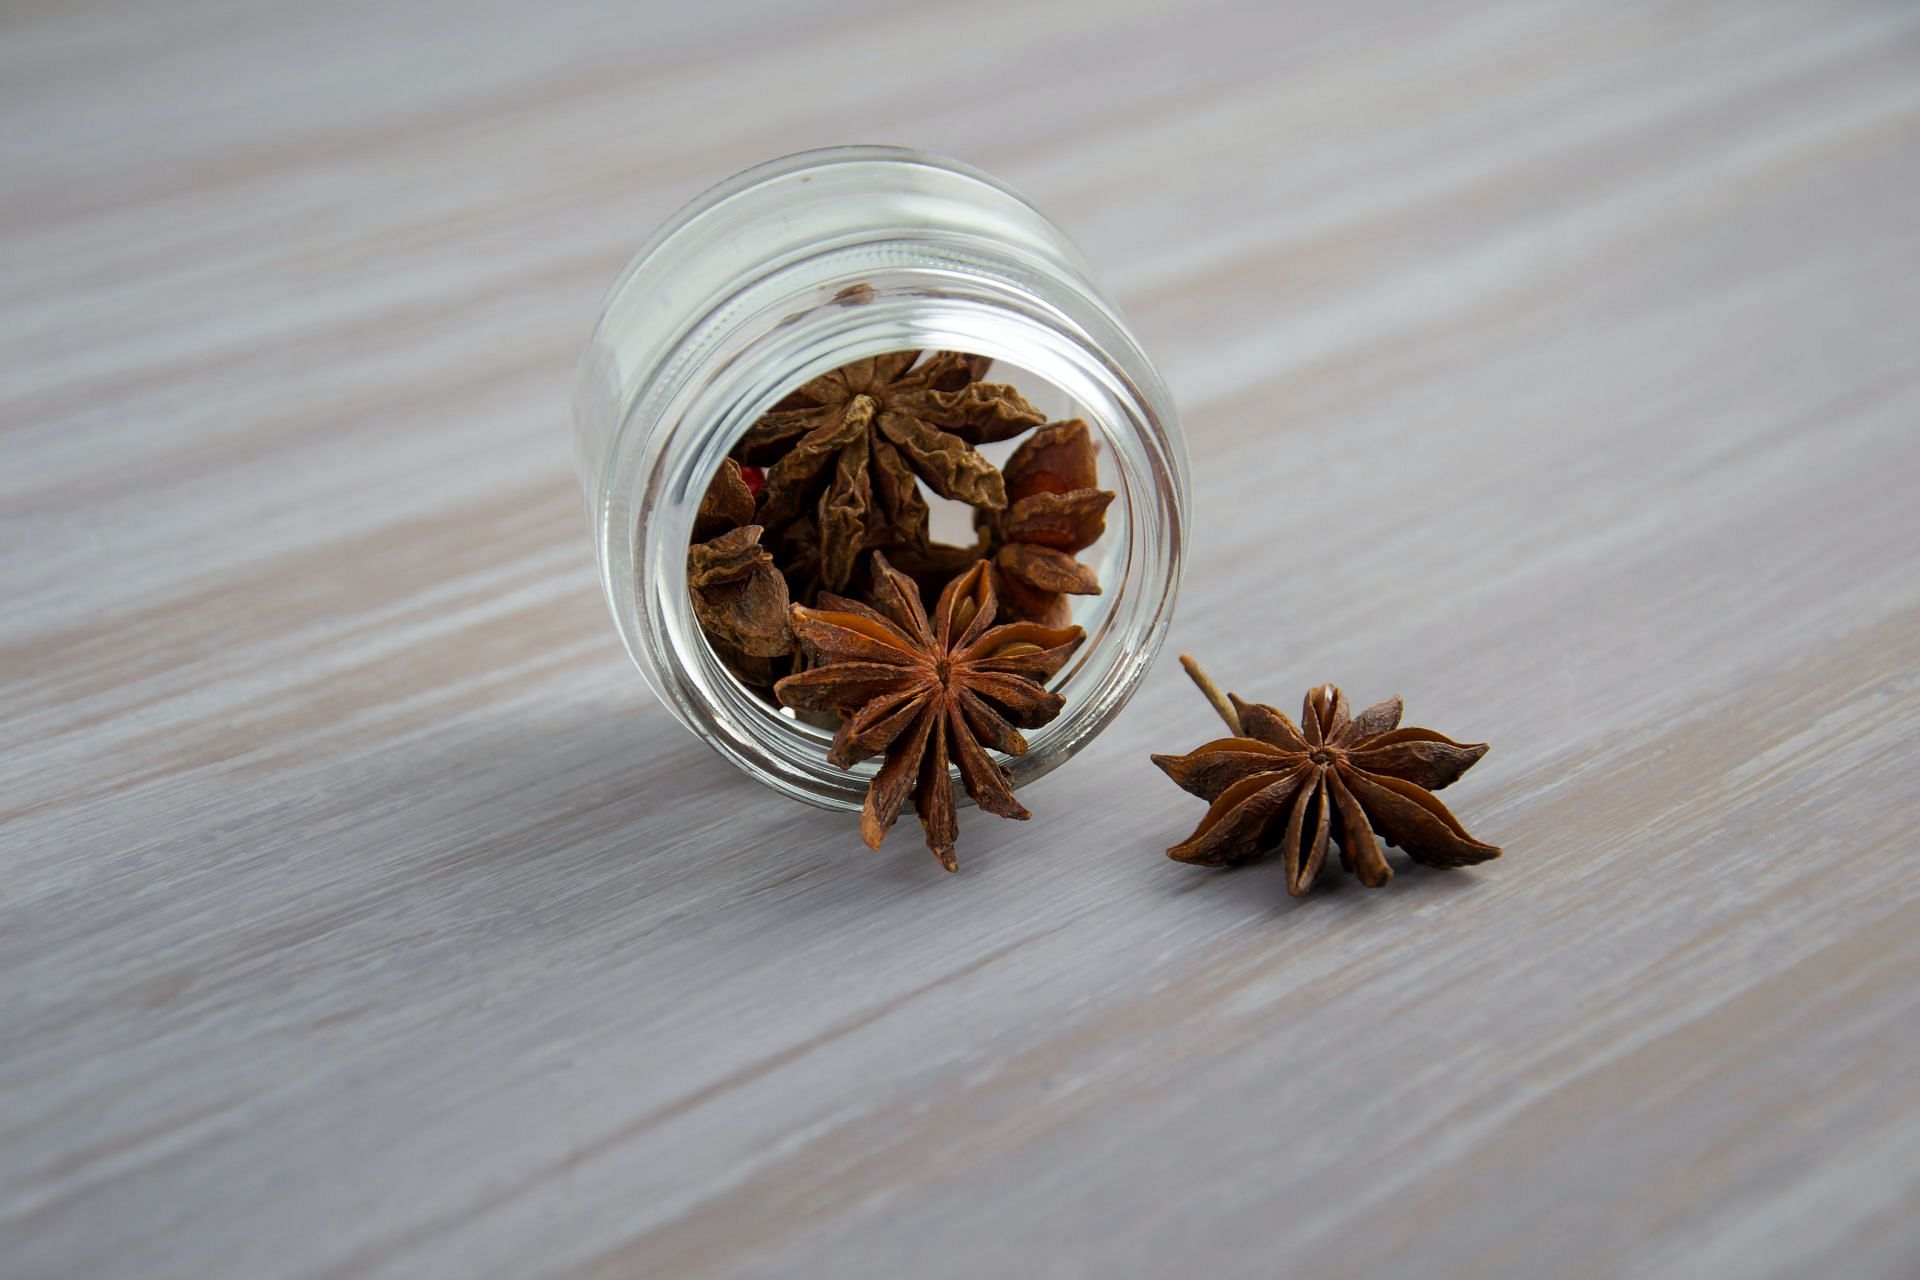 Star anise is a popular spice having numerous of health benefits (Image via Pexels/Mereefe)